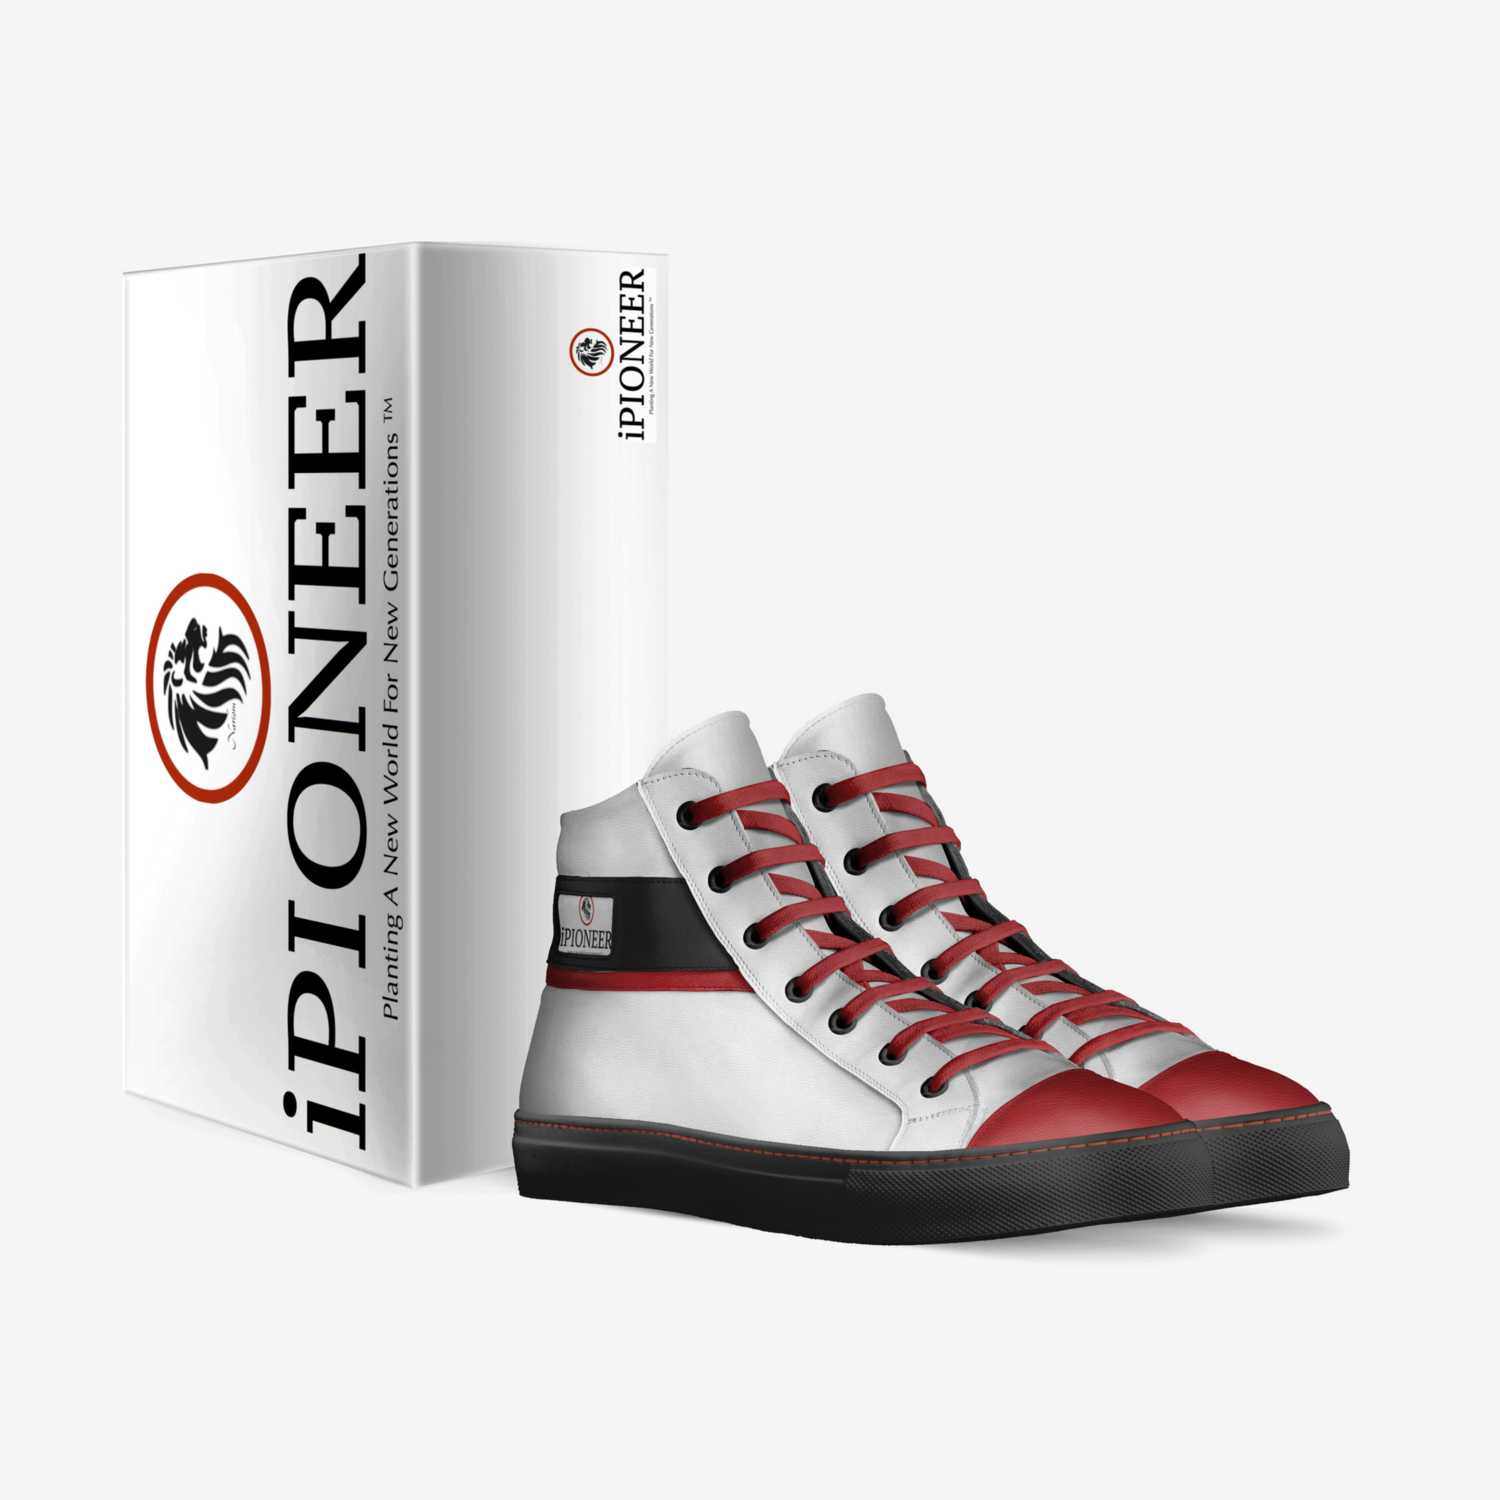 iPioneerHighBoot custom made in Italy shoes by Marlon D. Hester Sr. | Box view